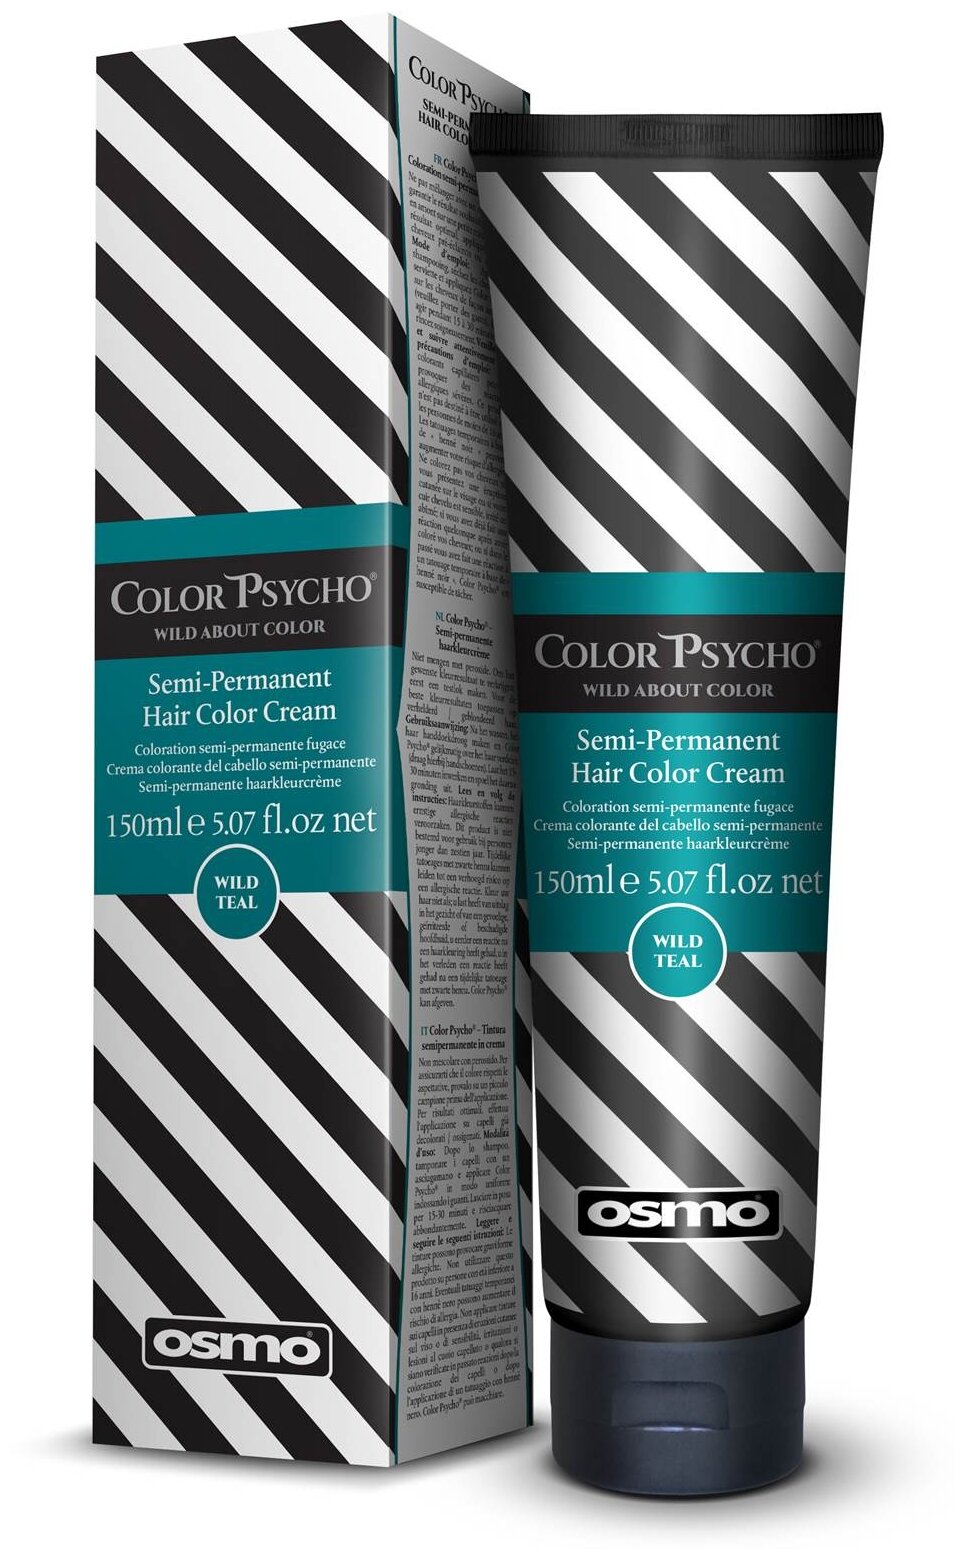 OSMO COLOR PSYCHO    Wild Teal " ", 150 